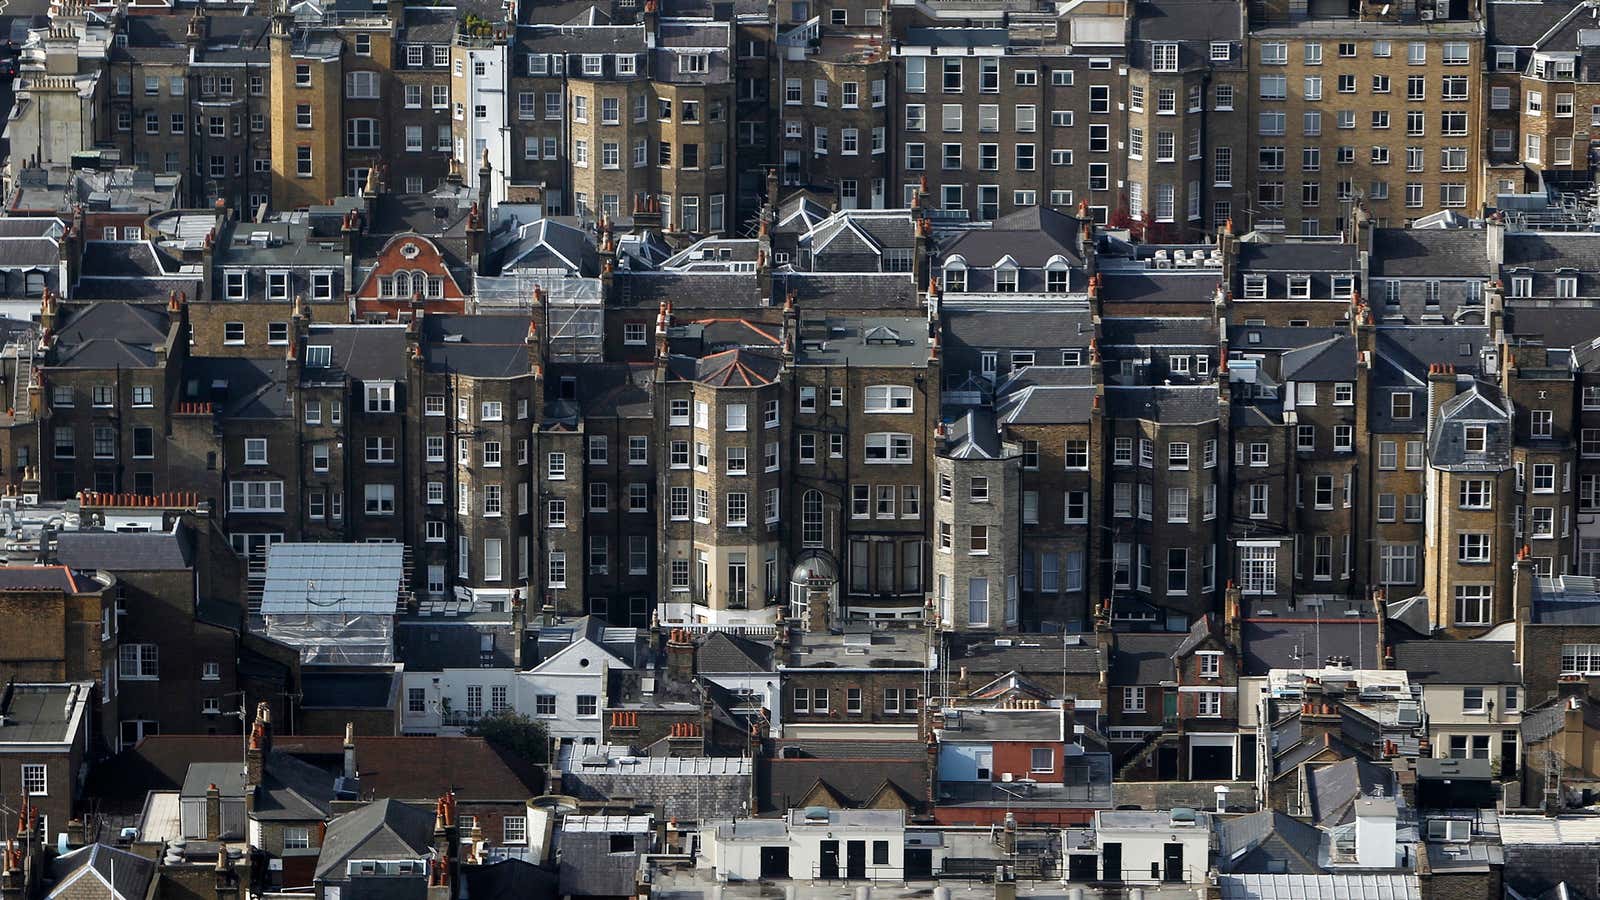 Central London, where rents are rising and austerity measures have slashed subsidies intended to help the poor remain in their apartments.